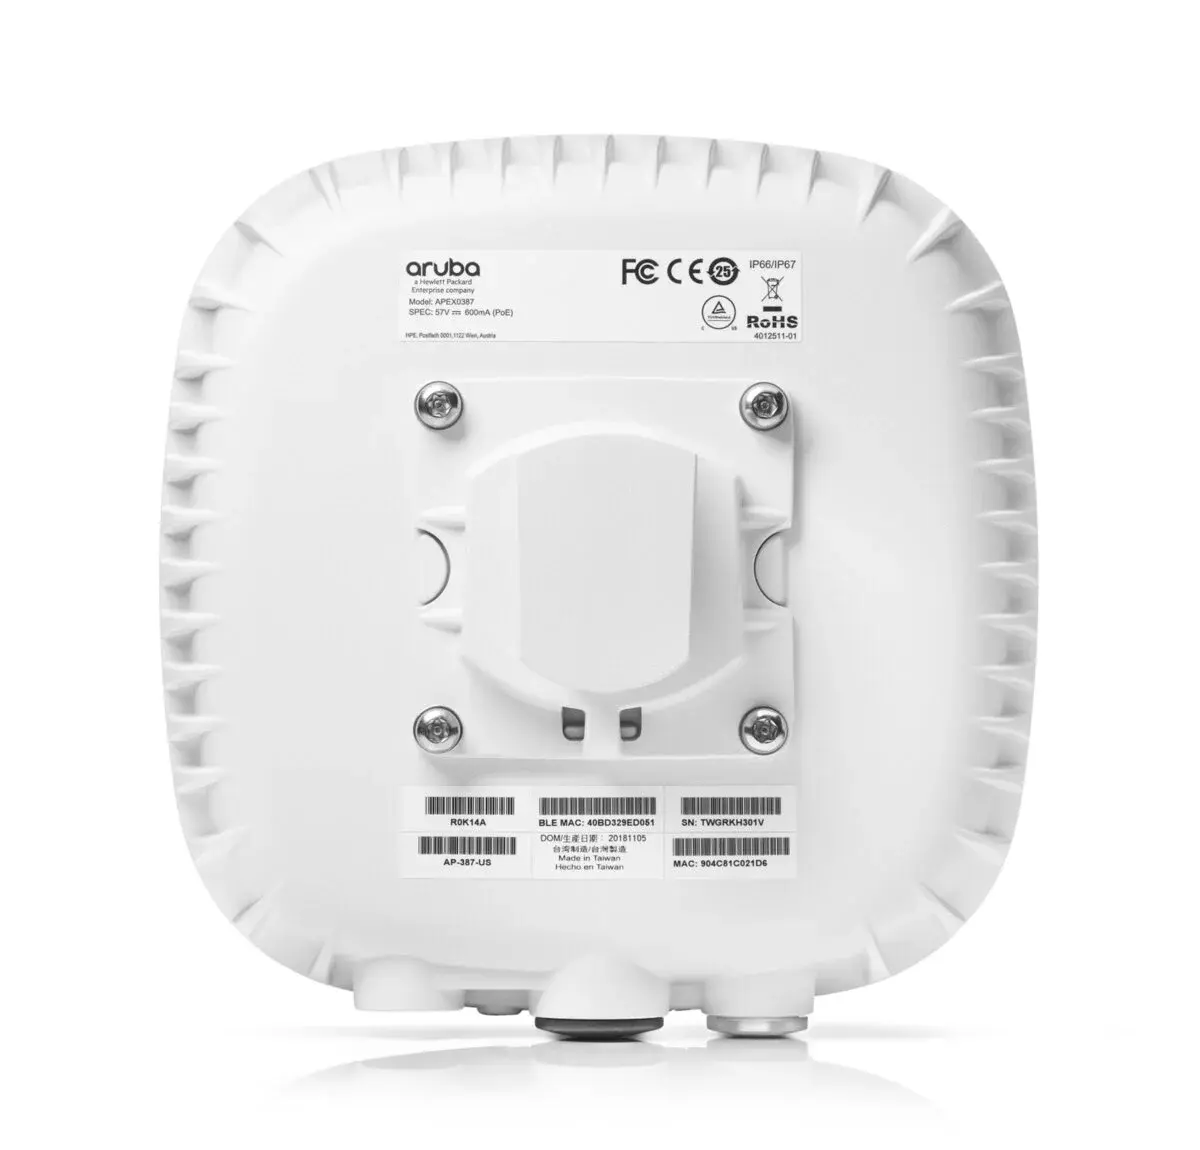 HP AP-387 (US) 5/60GHz Outdoor Radio Access Point